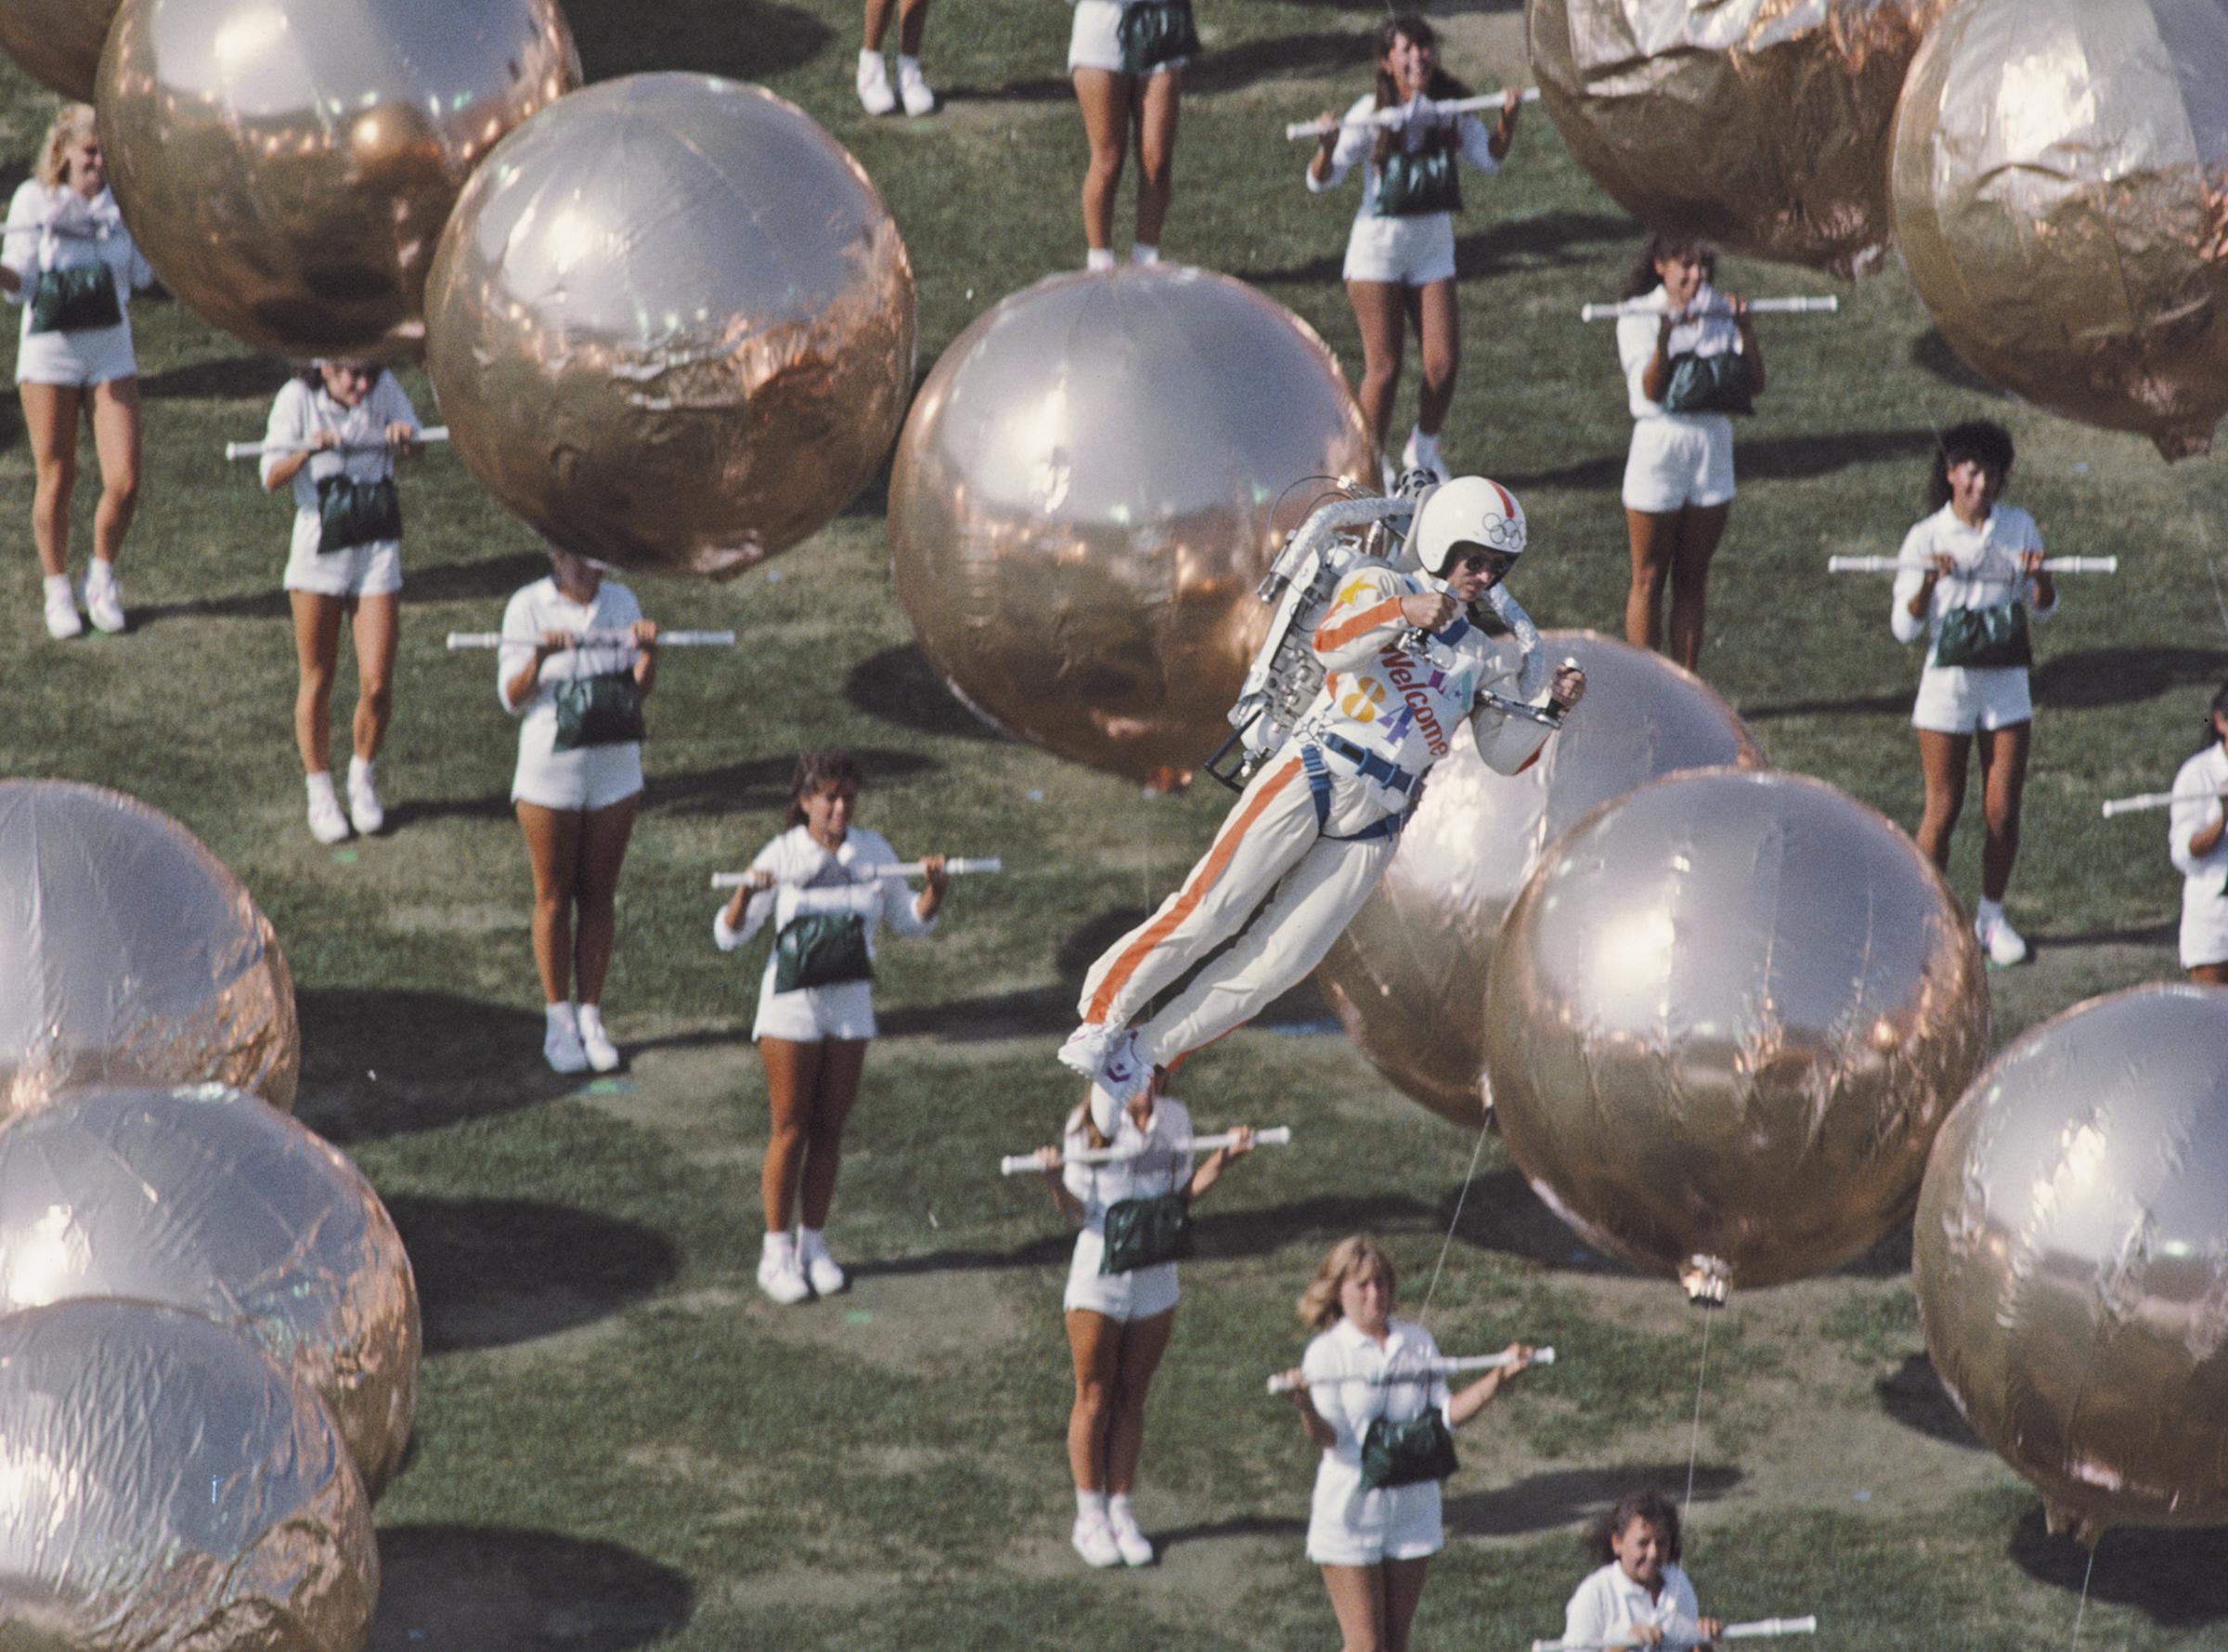 Los Angeles, 1984Bill Suitor hovers over the stadium by means of the Bell Aerosystems rocket pack.